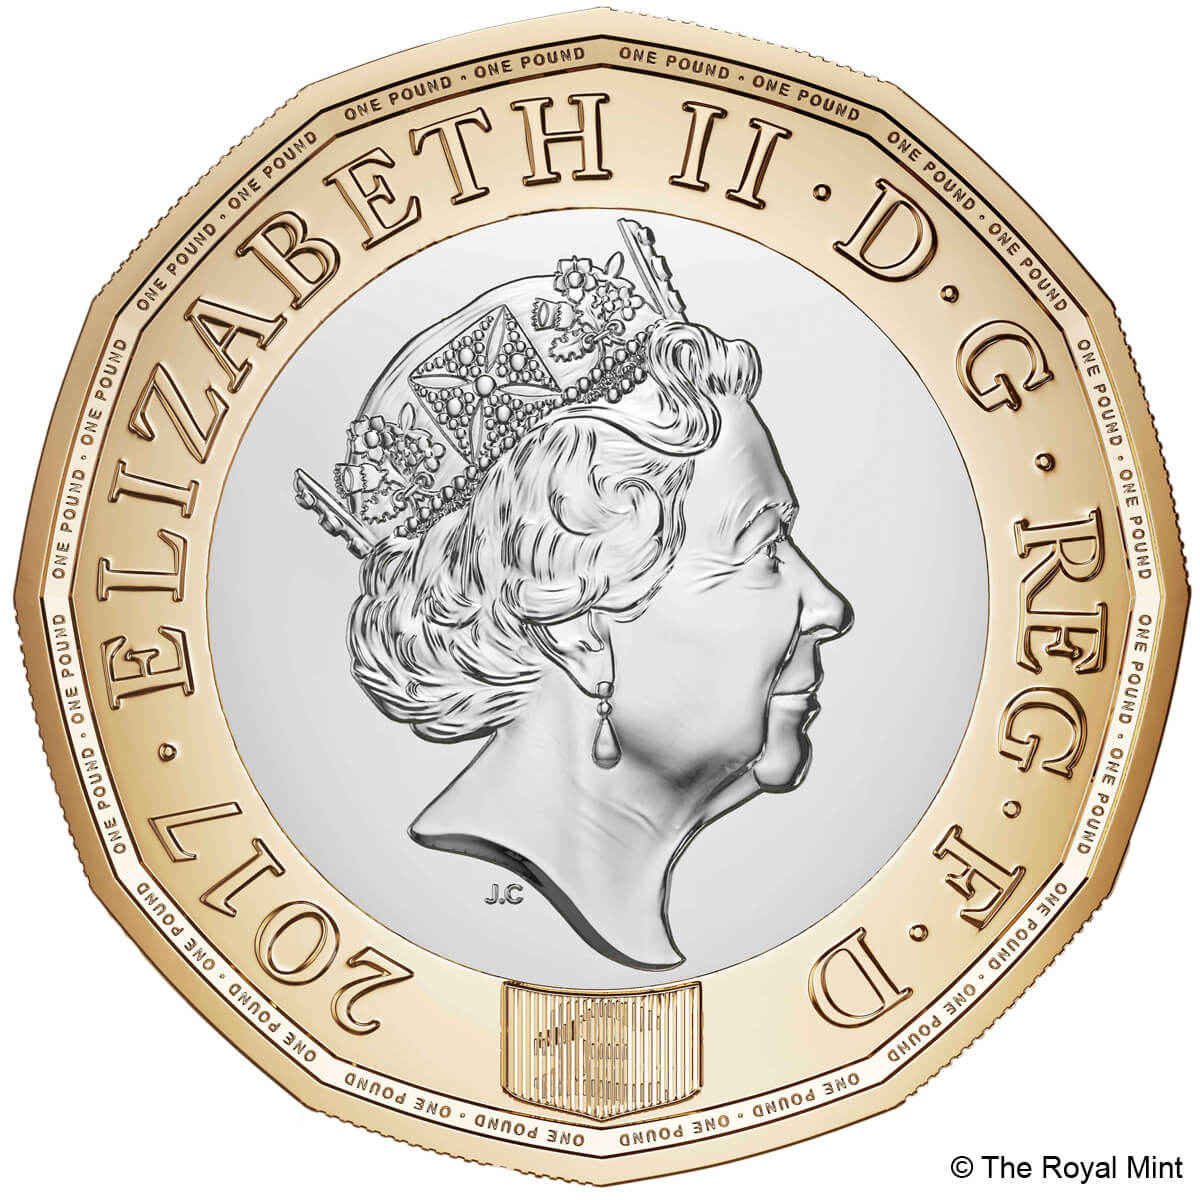 The new pound coin